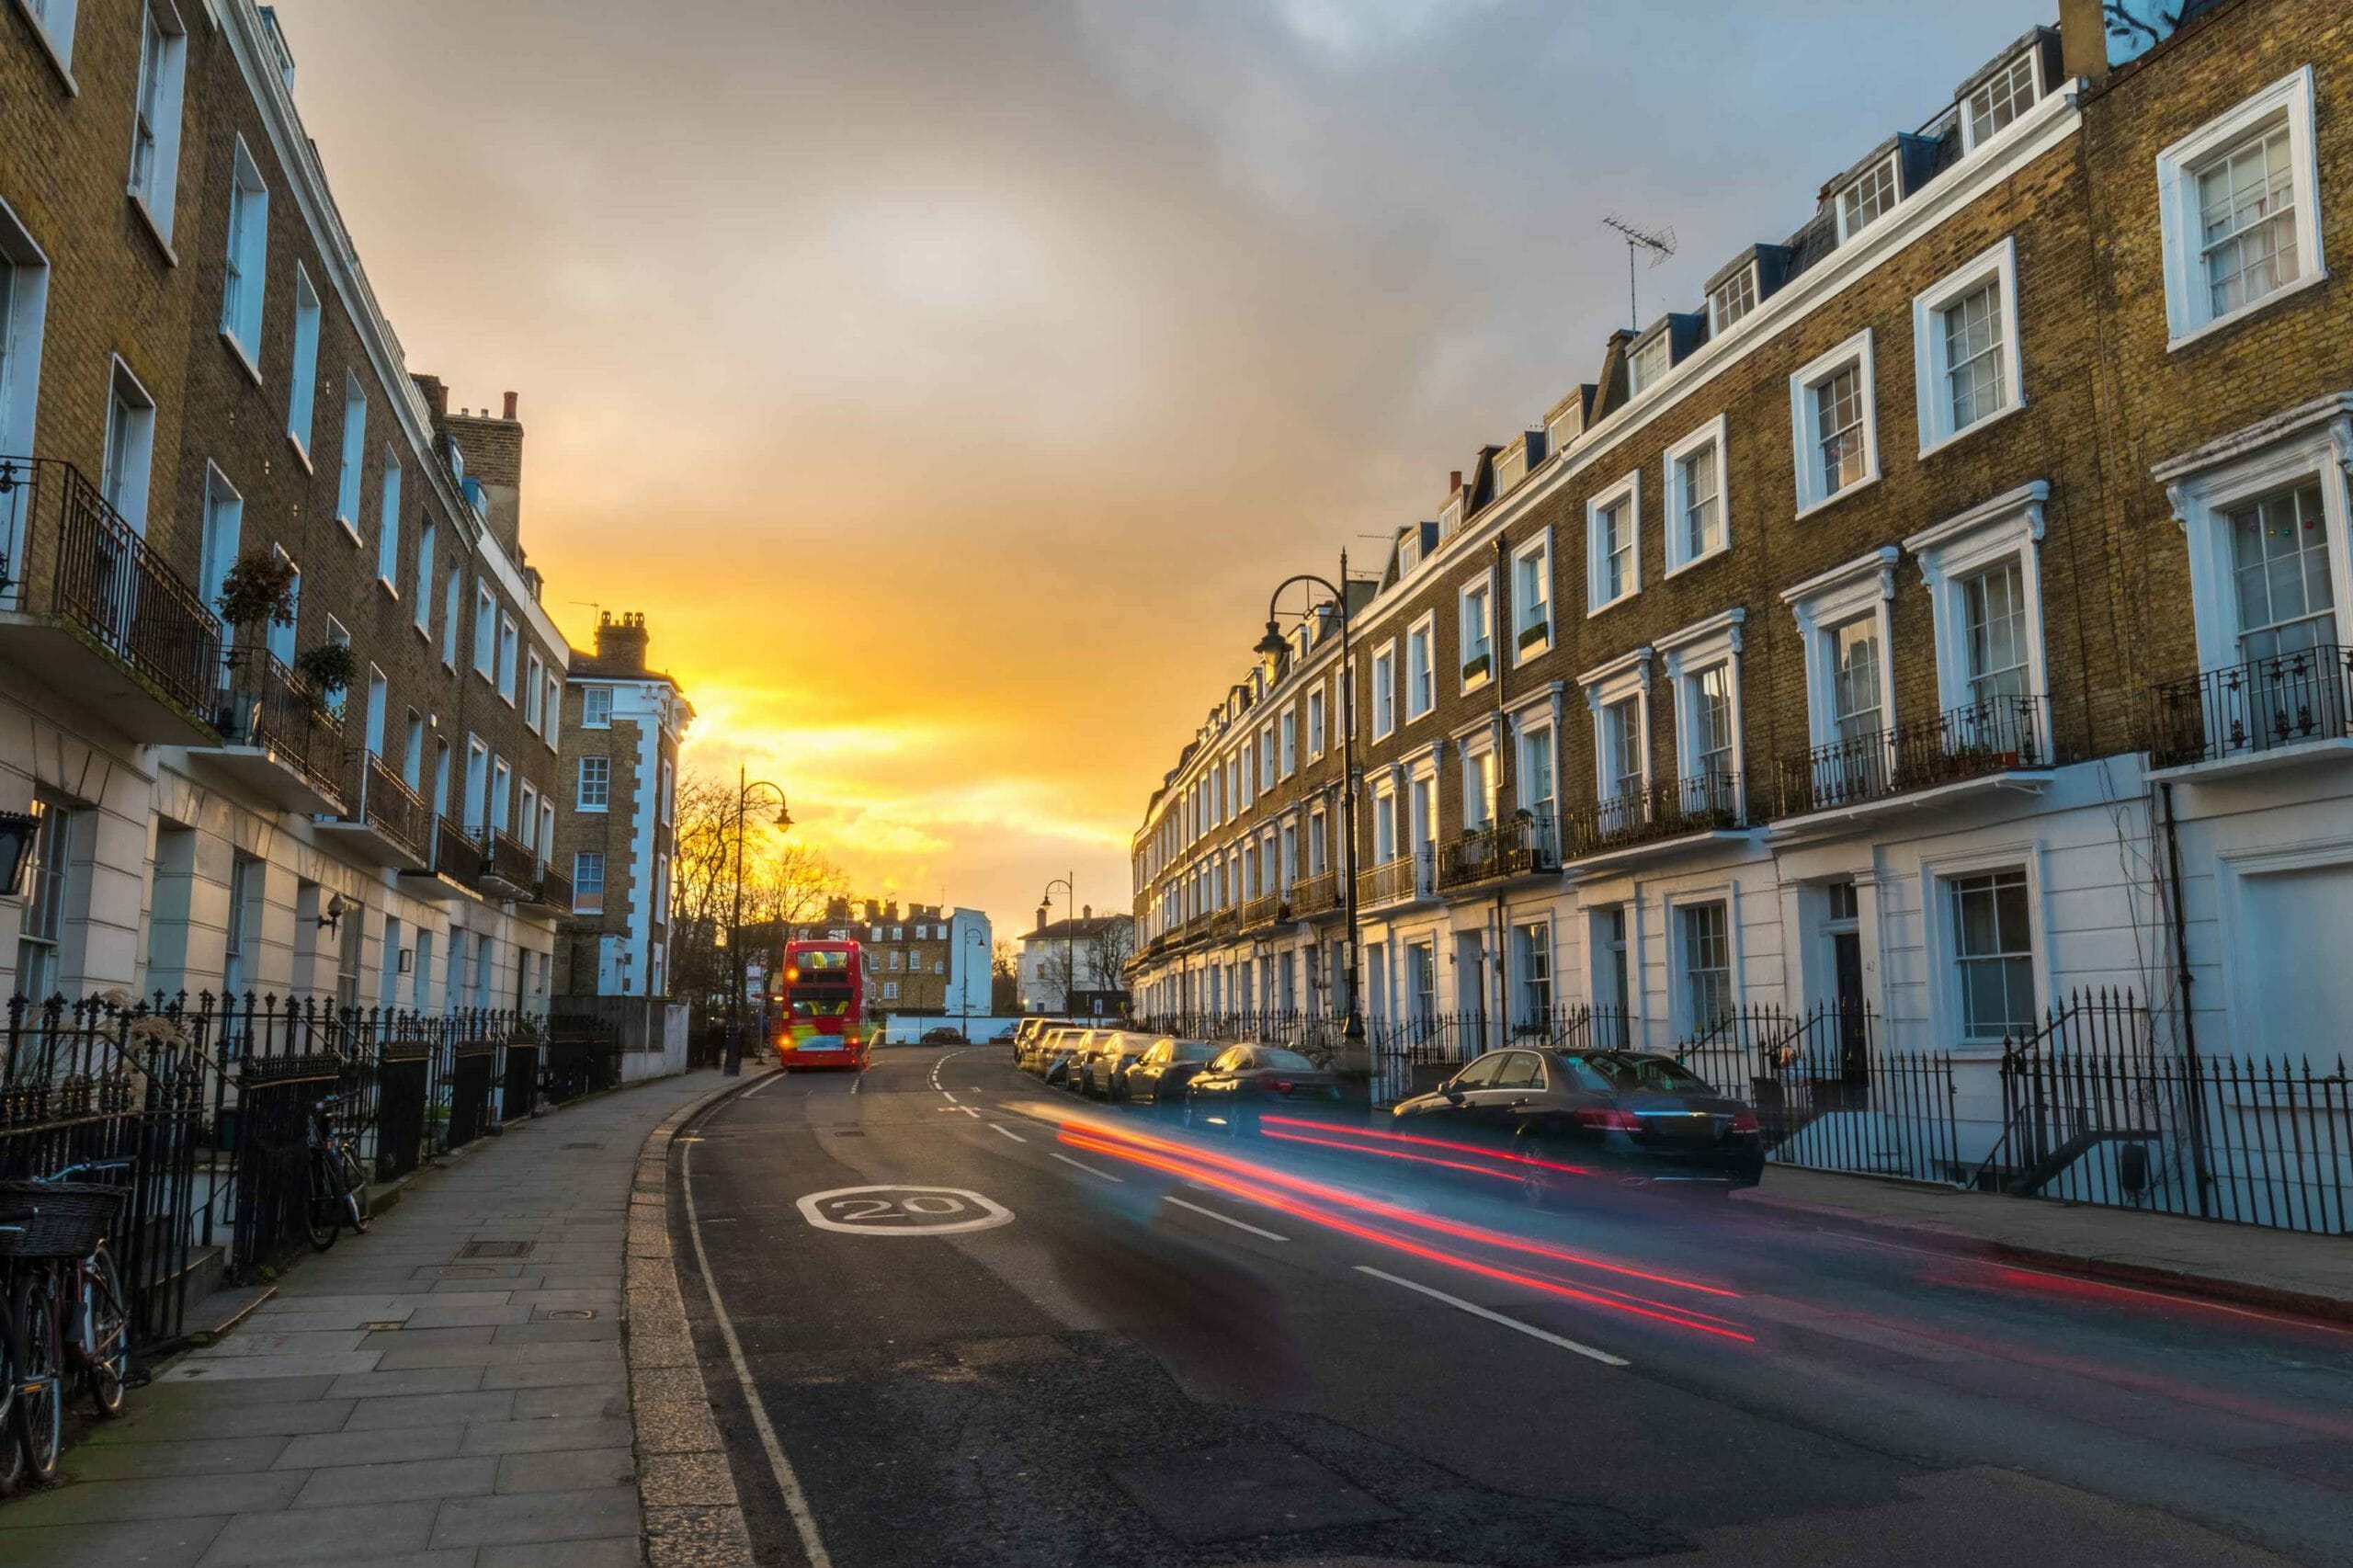 Row of houses in London at dusk